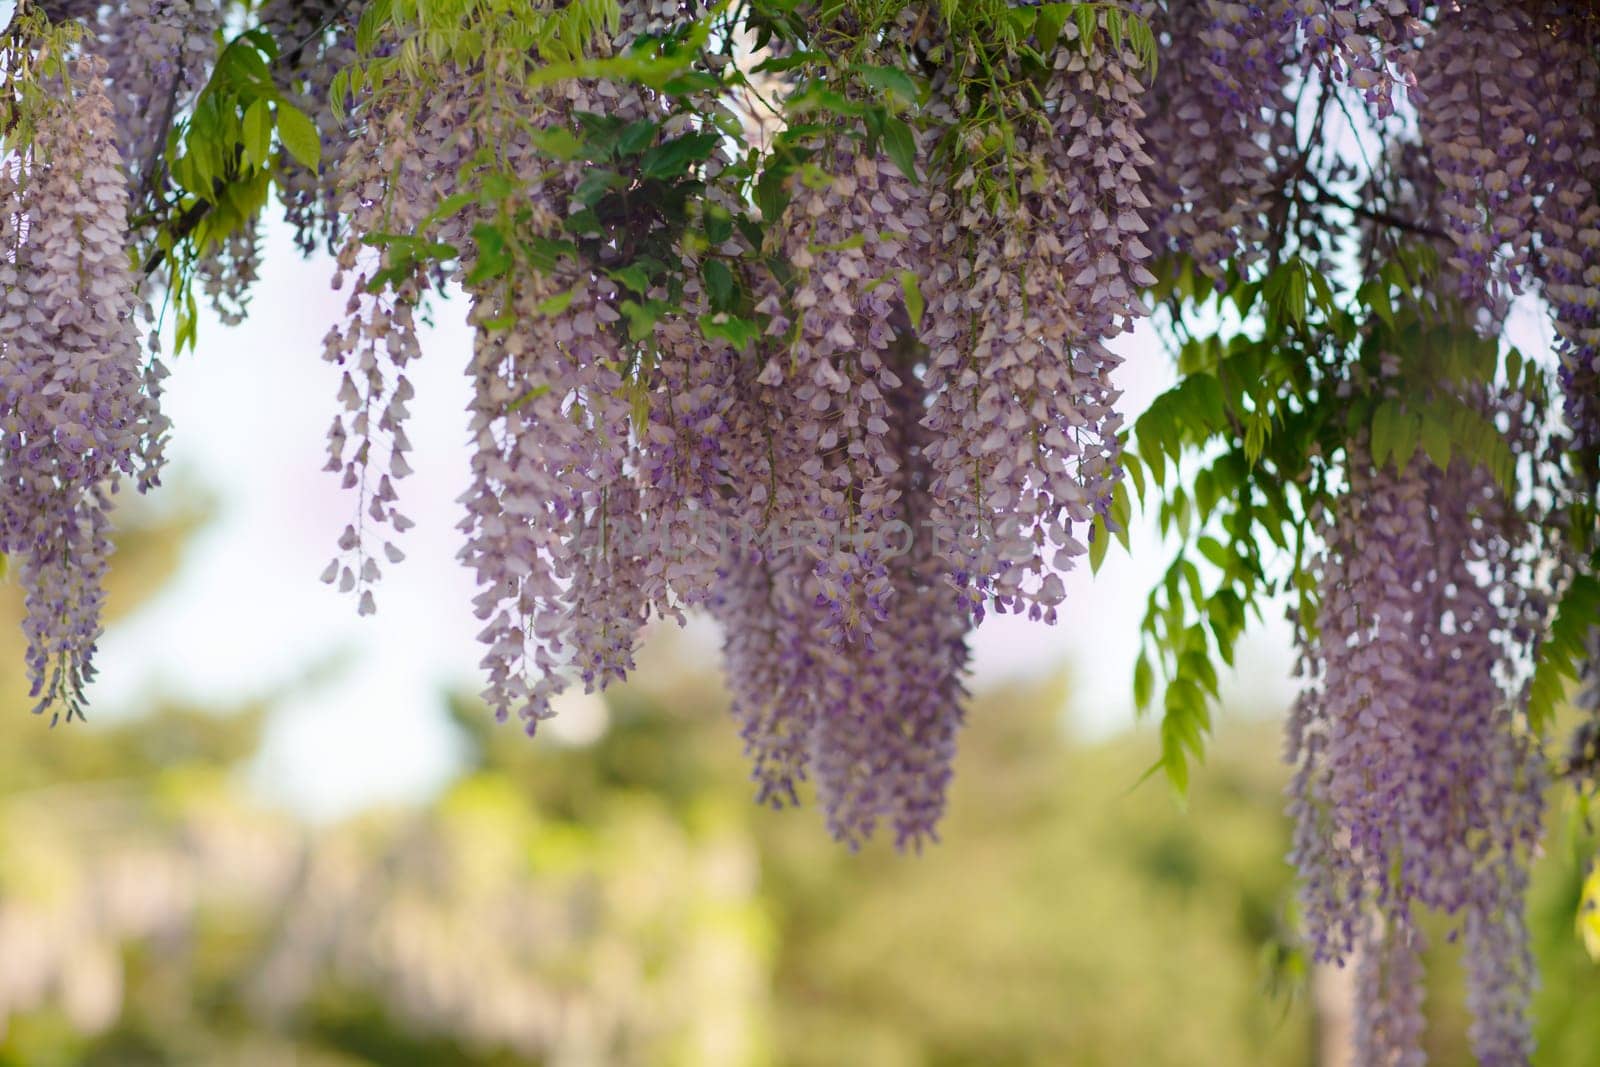 Close up view of beautiful purple wisteria blossoms hanging down from a trellis in a garden with sunlight shining from above through the branches on a sunny spring day